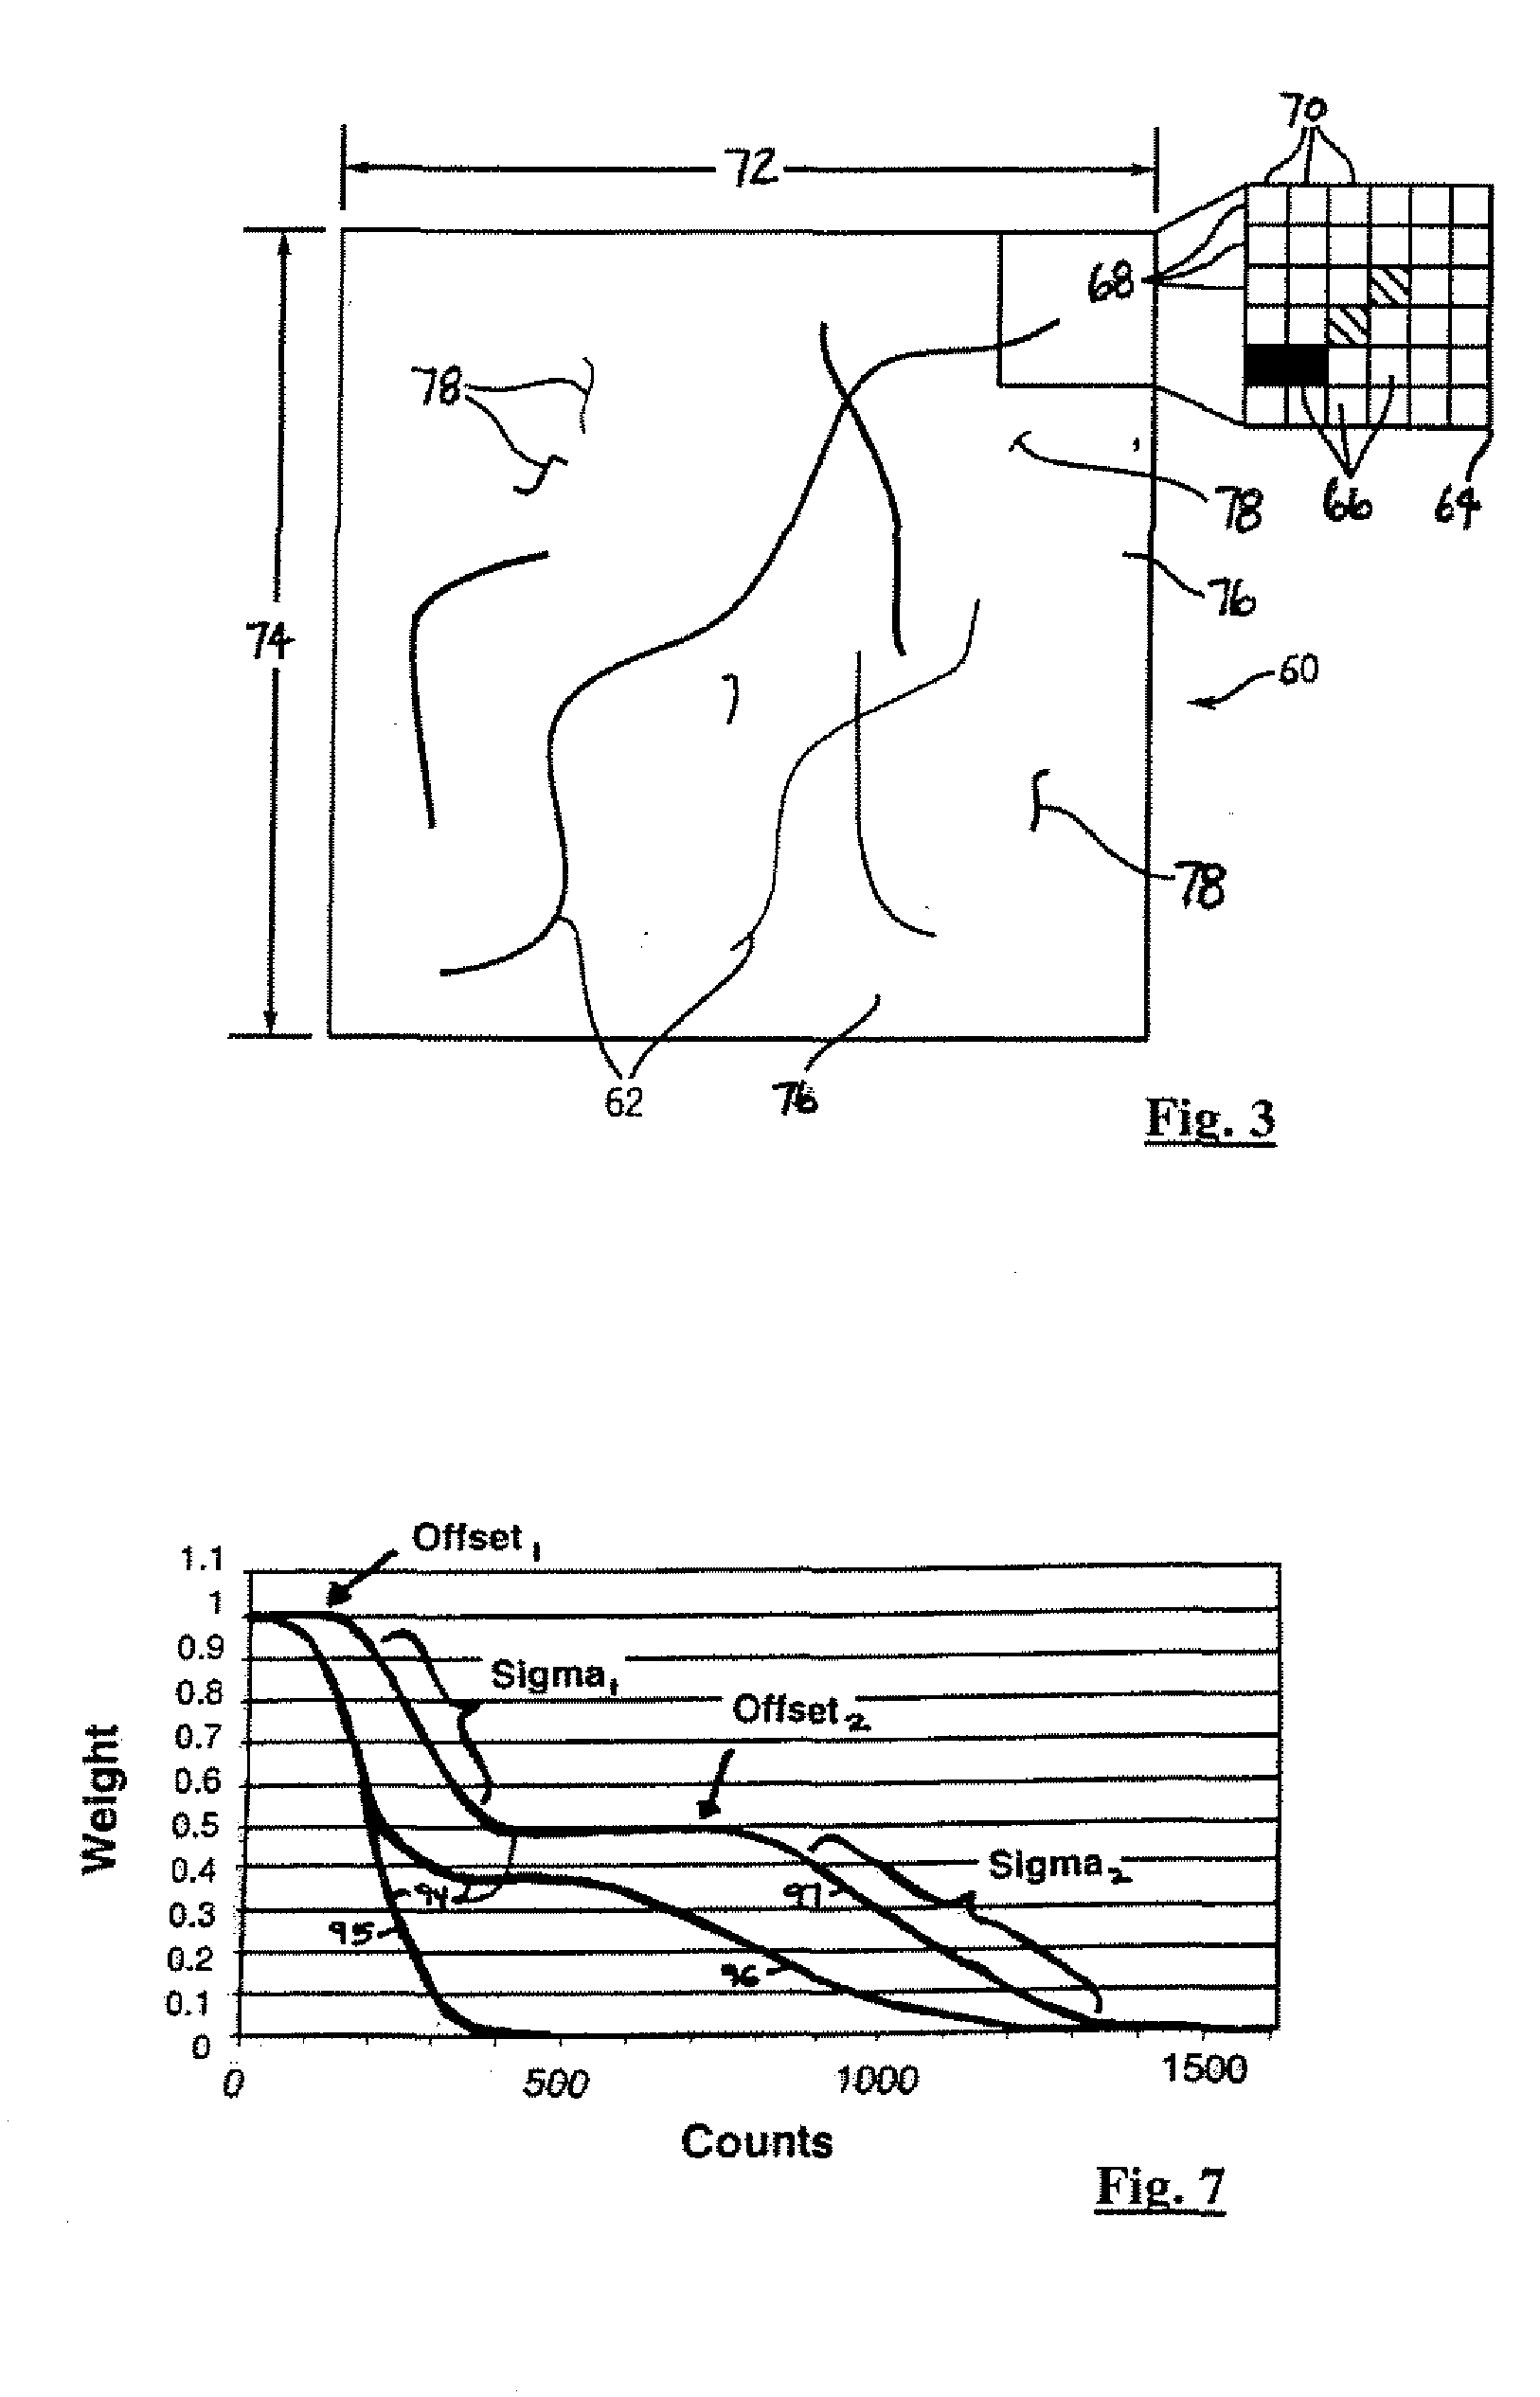 Count adaptive noise reduction method of x-ray images